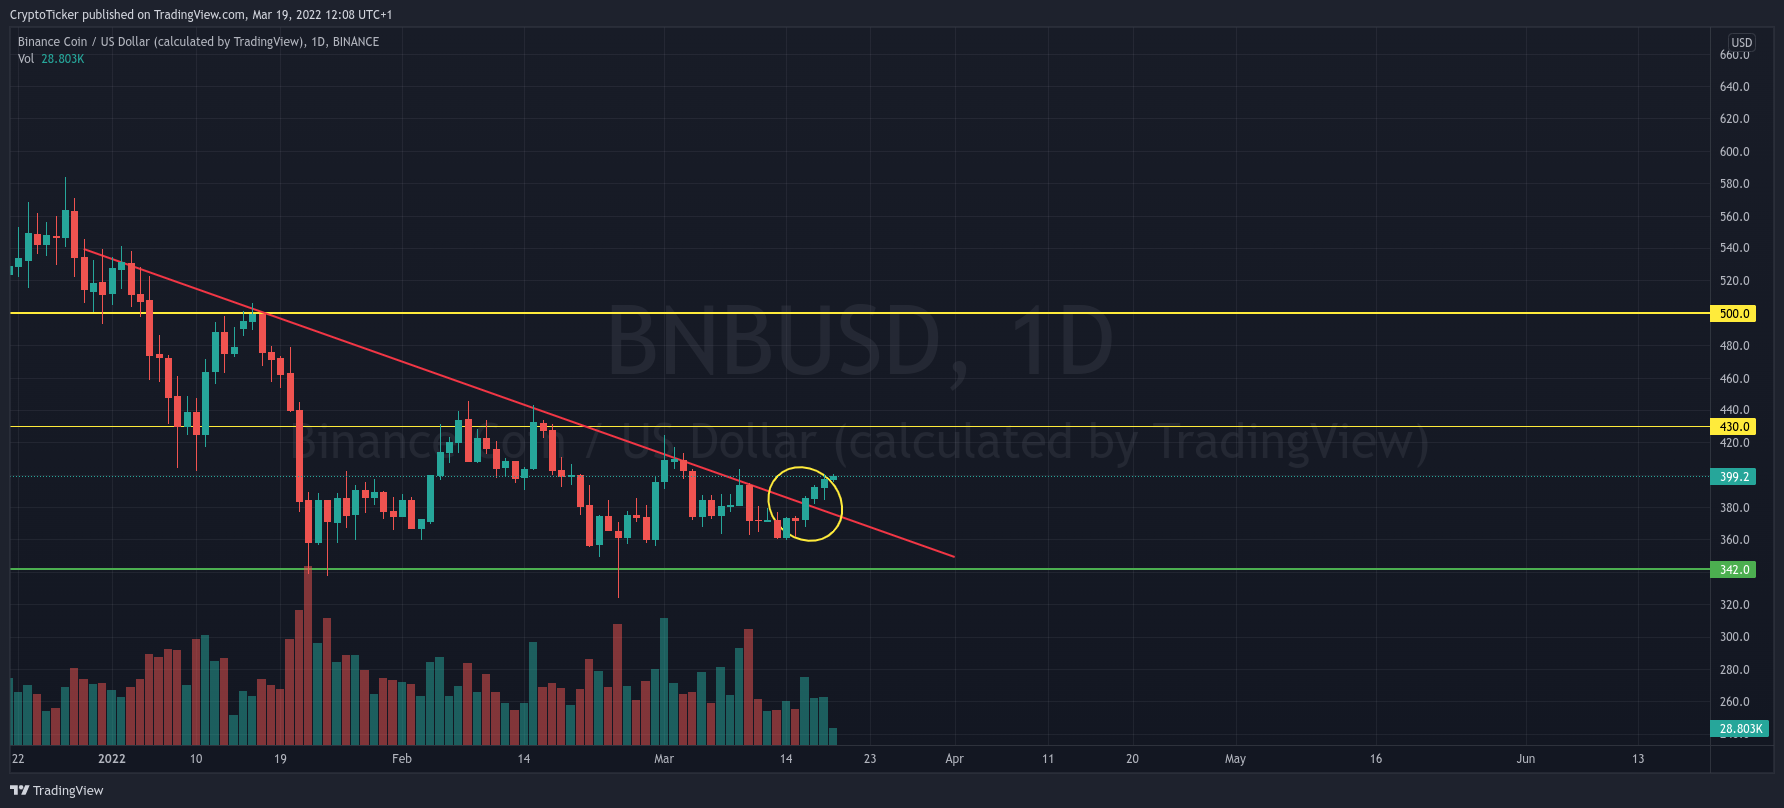 BNB price prediction: BNB/USD 1-day chart showing the break in the descending triangle of BNB